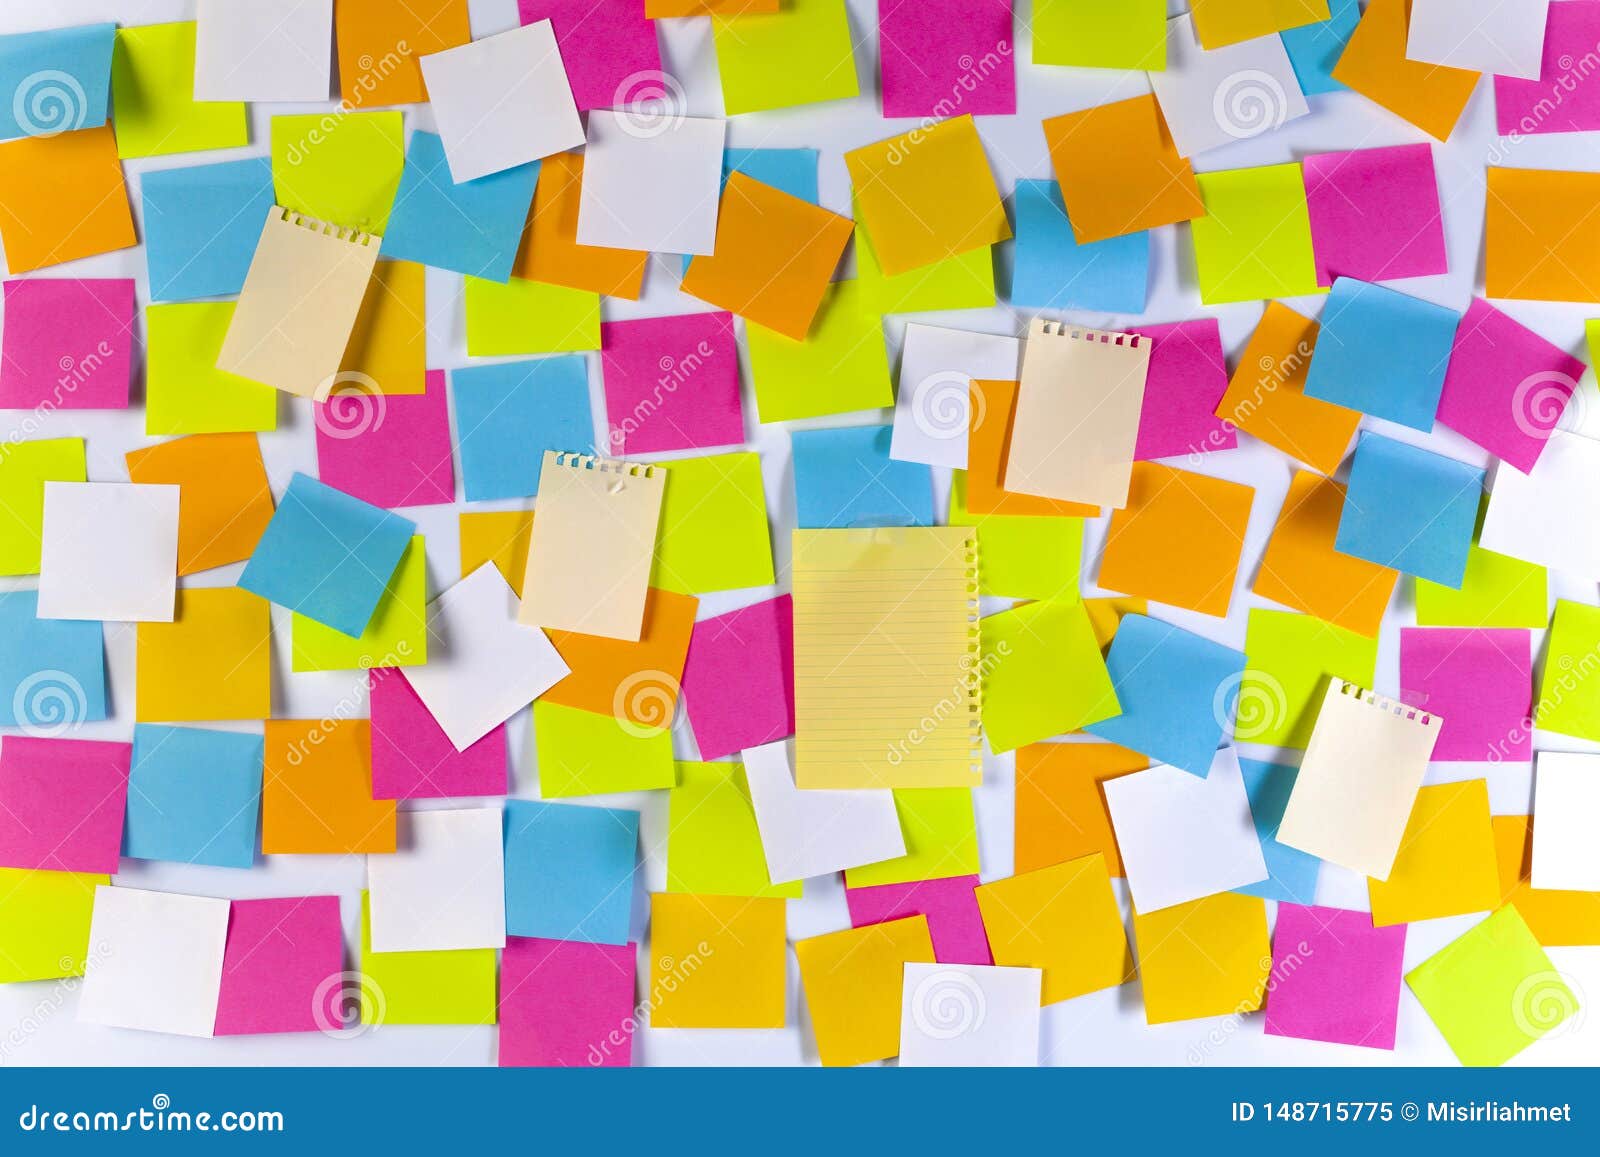 860+ Giant Sticky Notes Stock Photos, Pictures & Royalty-Free